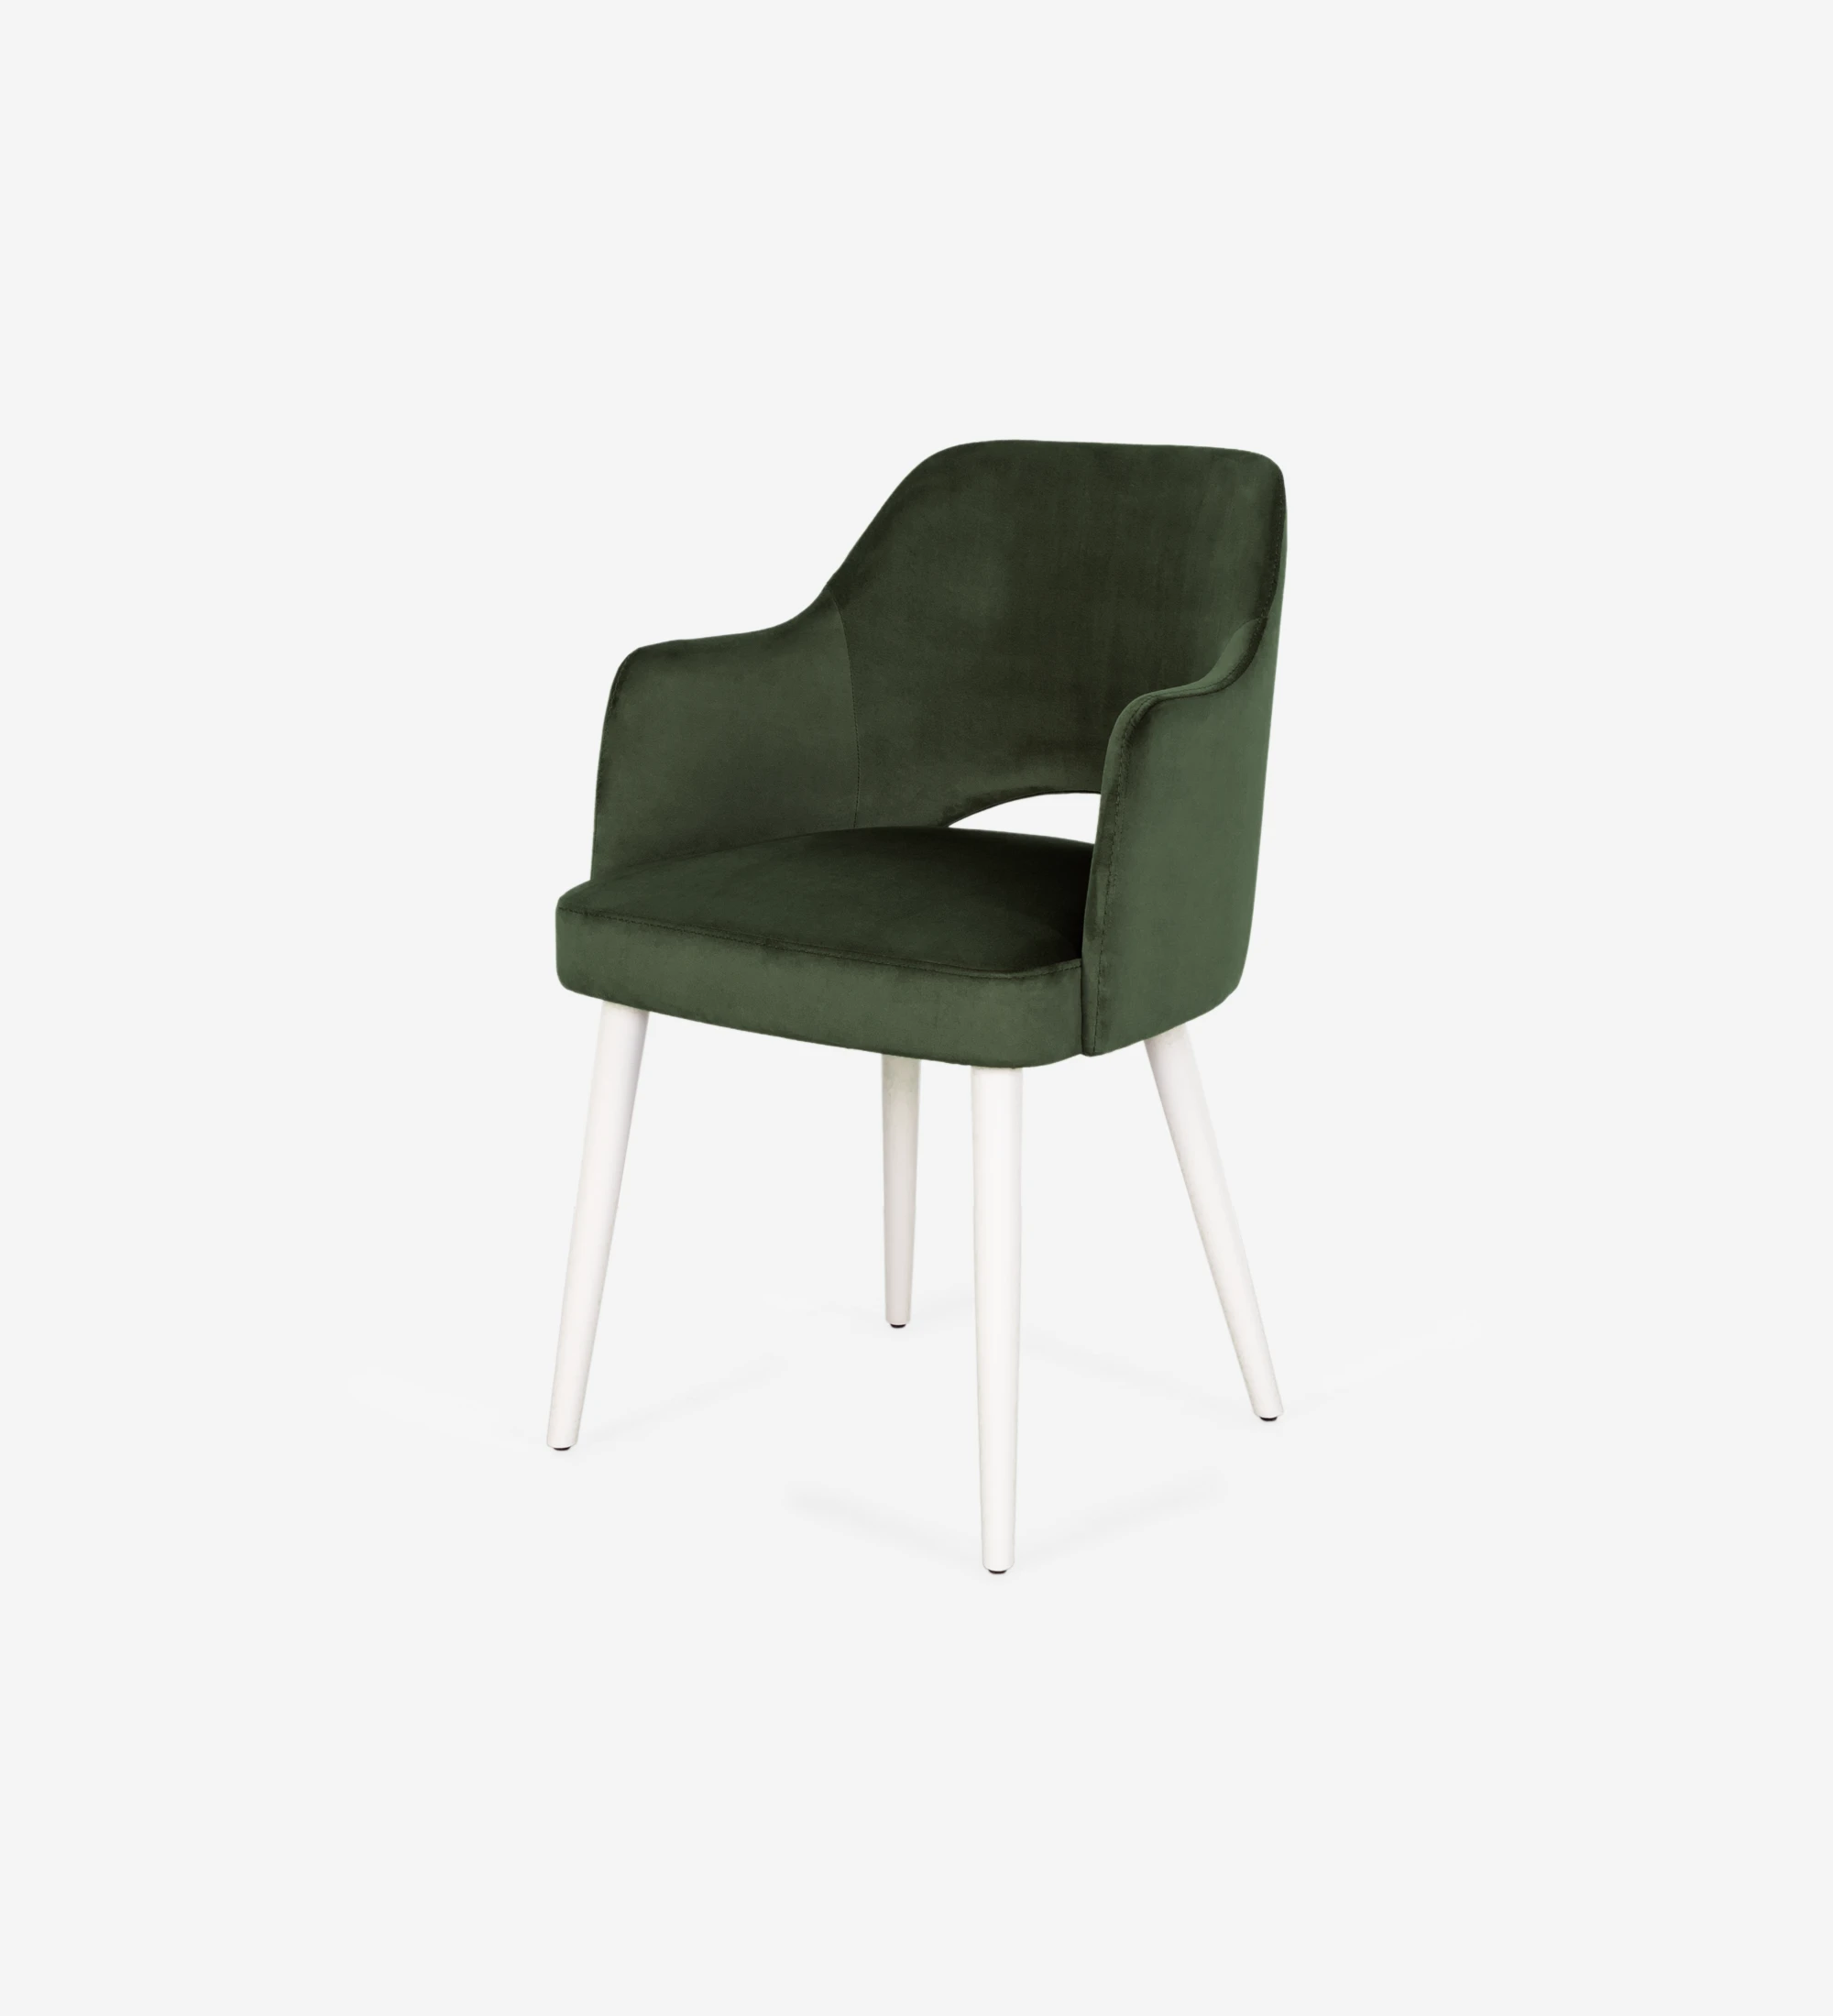 Londres chair with arms upholstered in green fabric, pearl lacquered feet.